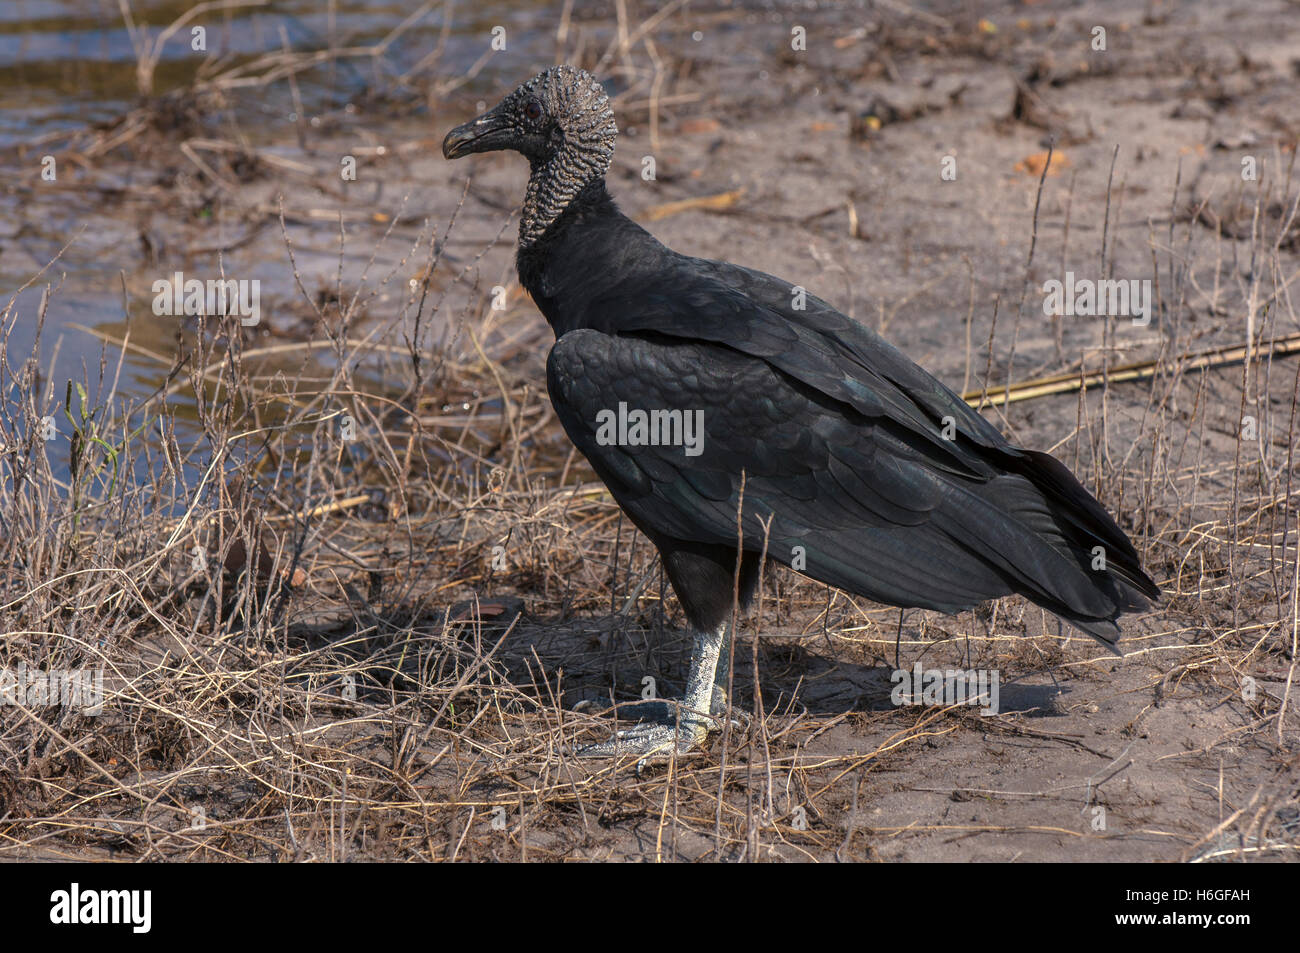 Black Vulture standing in profile near the edge of a river Stock Photo